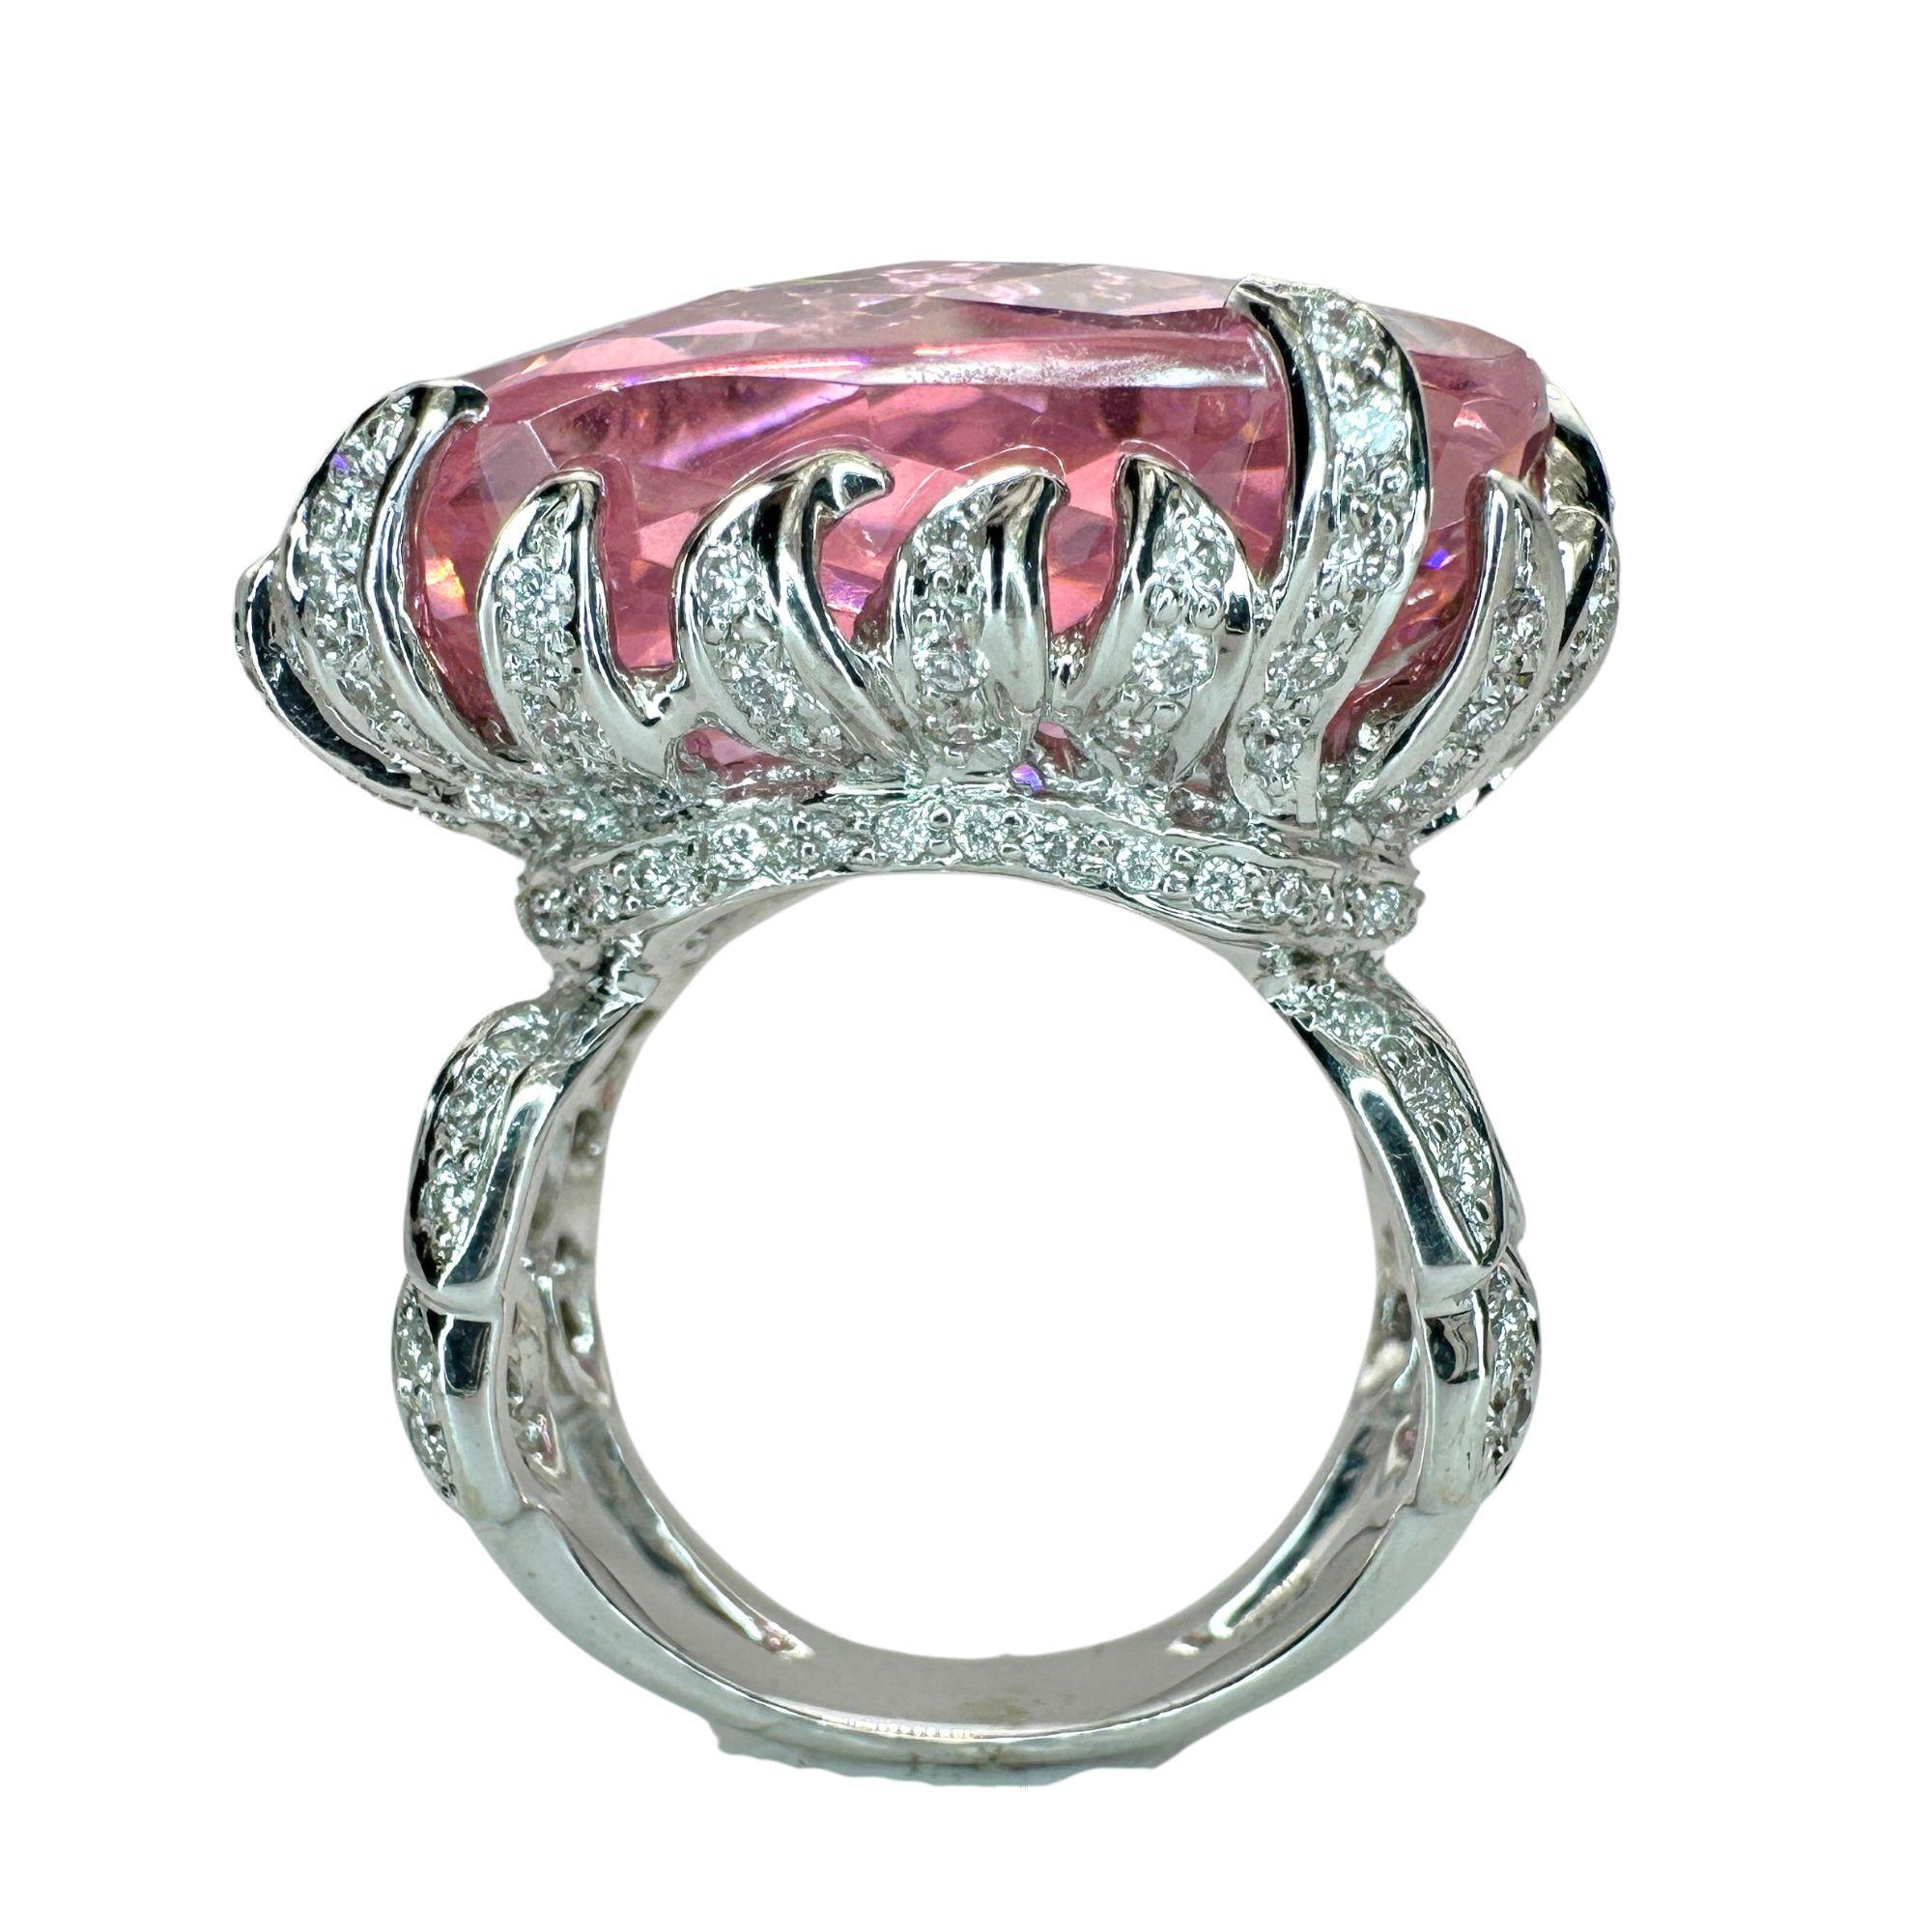 Indulge in luxury with our 18k Diamond and Pink Stone Center Cocktail Ring. The 50.47 carat pink stone takes center stage, surrounded by 1.10 carats of diamonds. Crafted from 18k white gold, this ring exudes sophistication and elegance. In good